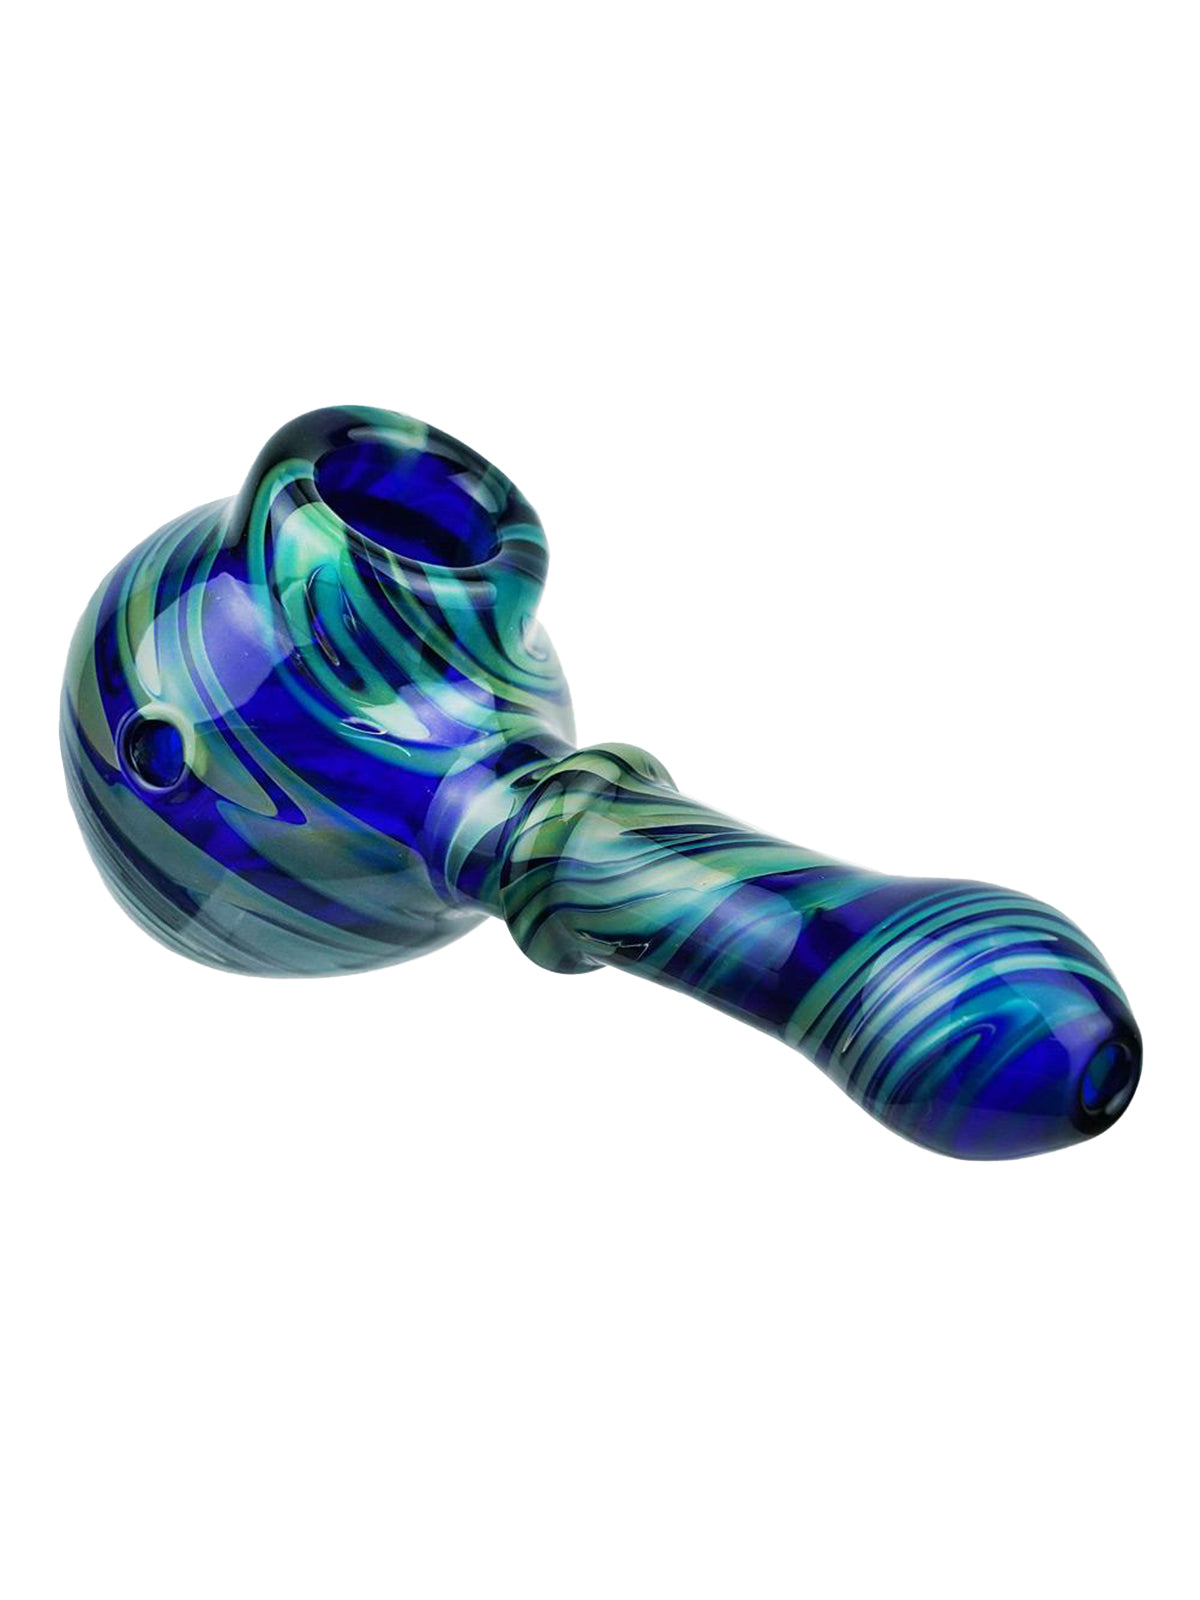 Stratus Glass HandPipe &quot;Oil In Water&quot; With BIS